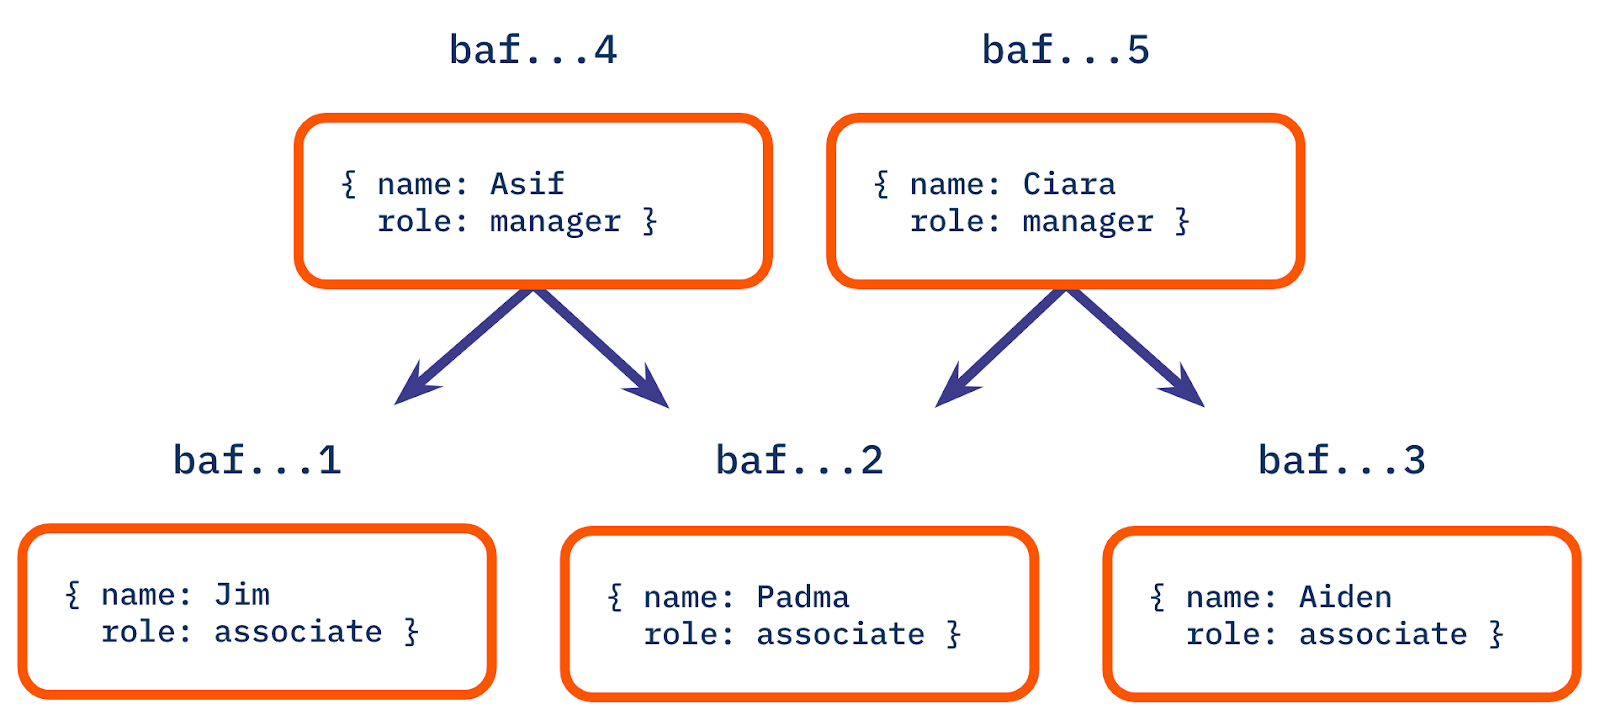 A Merkle DAG with five nodes. The three leaf nodes describe the associate-level employees Jim, Padma, and Aiden, labeled "baf...1" through "baf...3". Two non-leaf nodes describe the managers: Asif ("baf...4"), who manages Jim and Padma; and Ciara ("baf...5"), who manages Padma and Aiden. The nodes for managers embed the CIDs of the employees they manage.